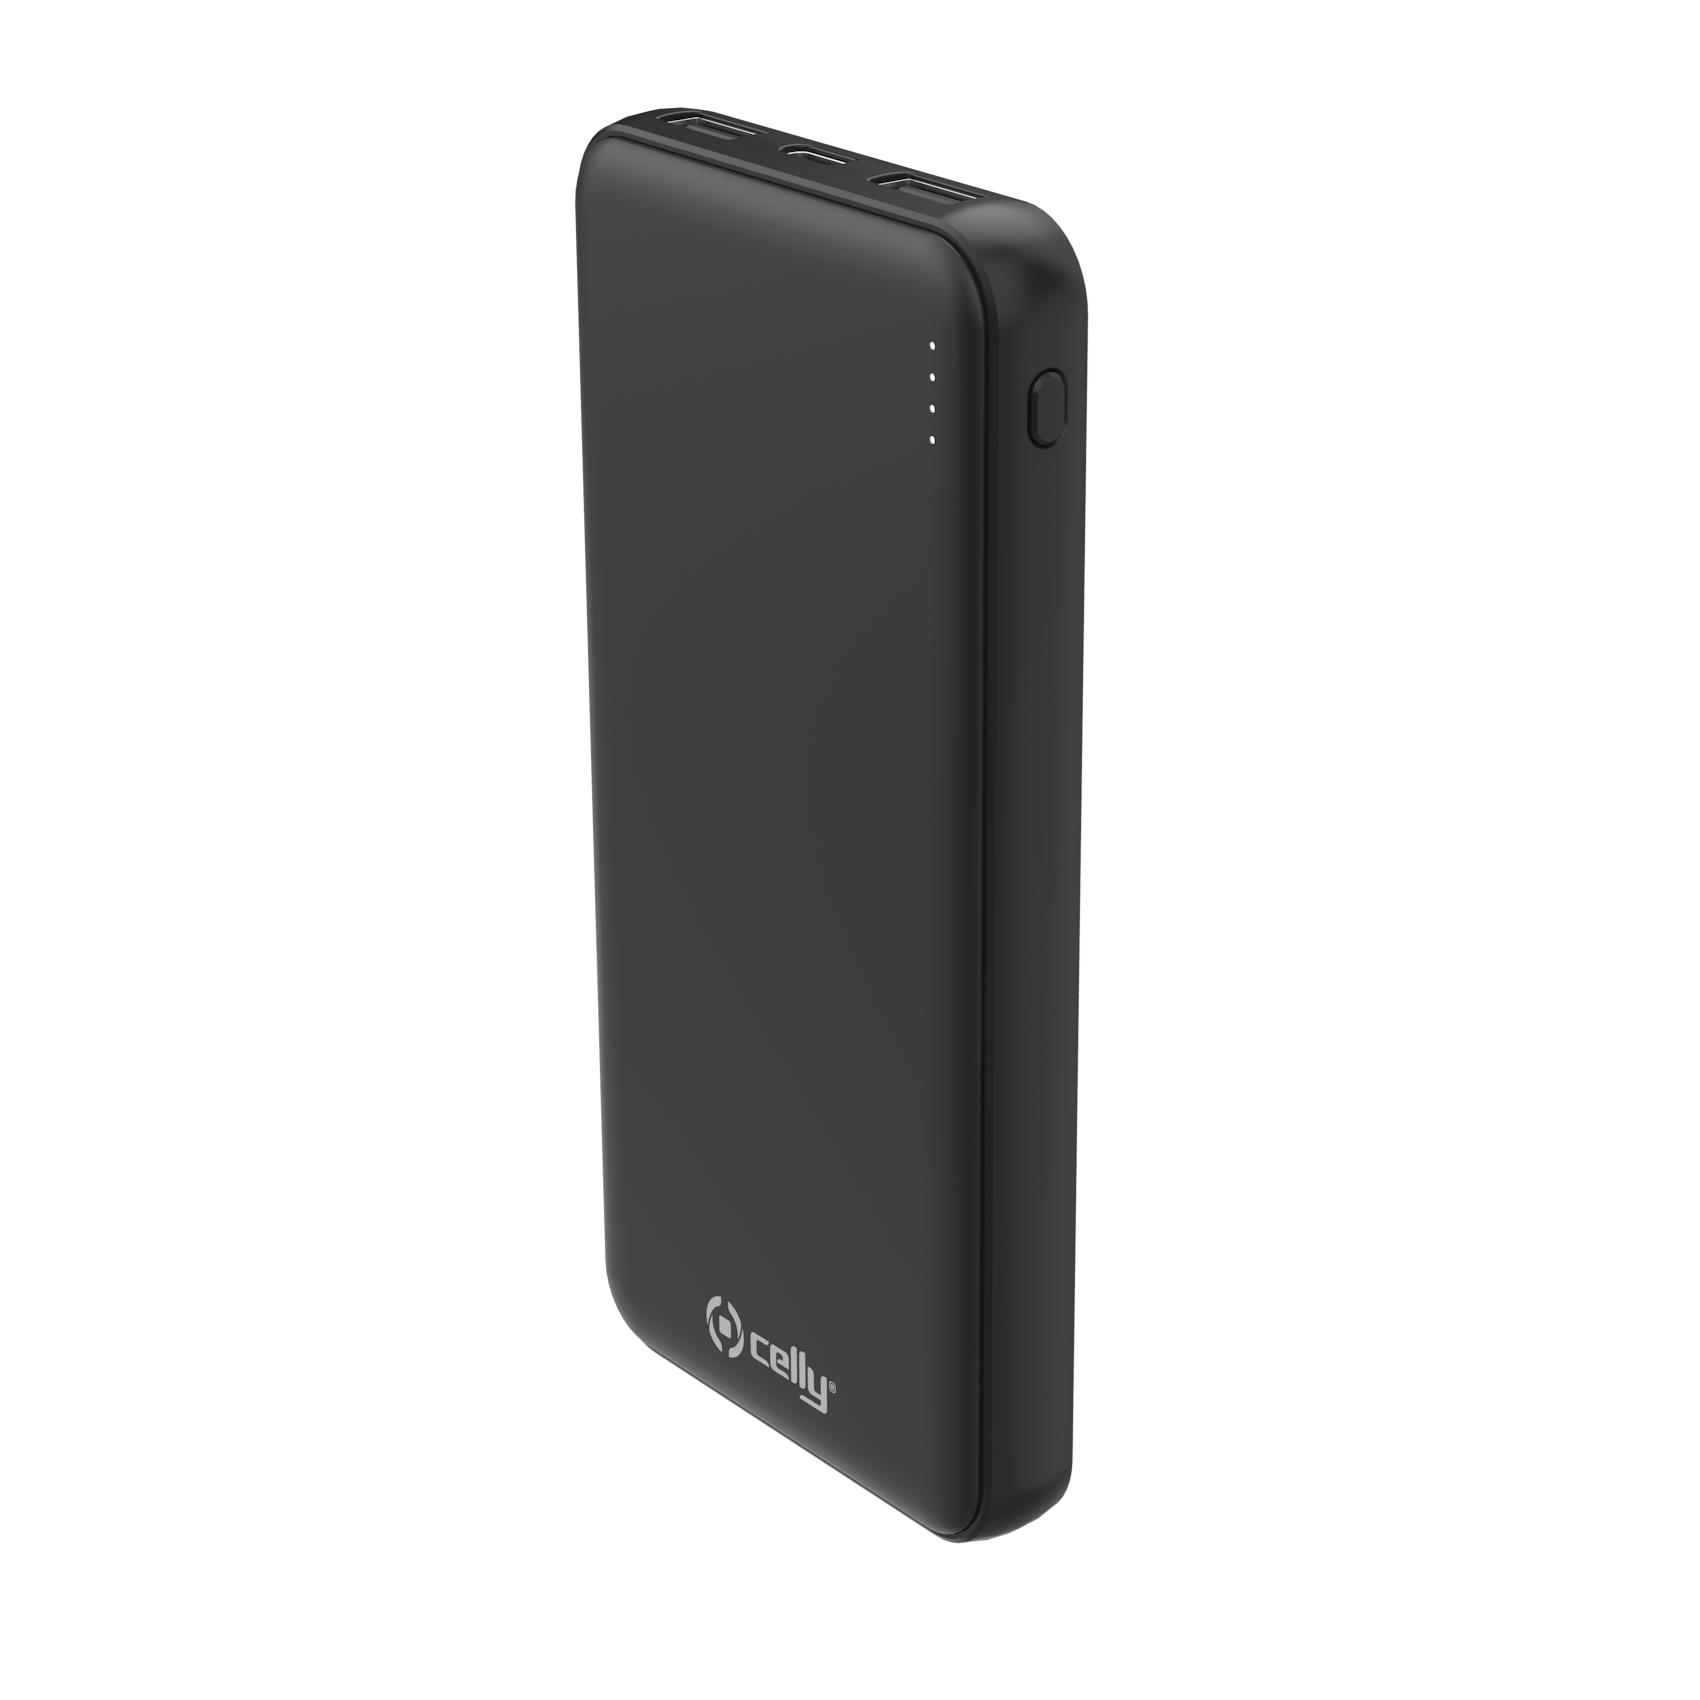 GRSPB10000 - Power Bank 10000 mAh - 100% Recycled Plastic [PLANET COLLECTION]